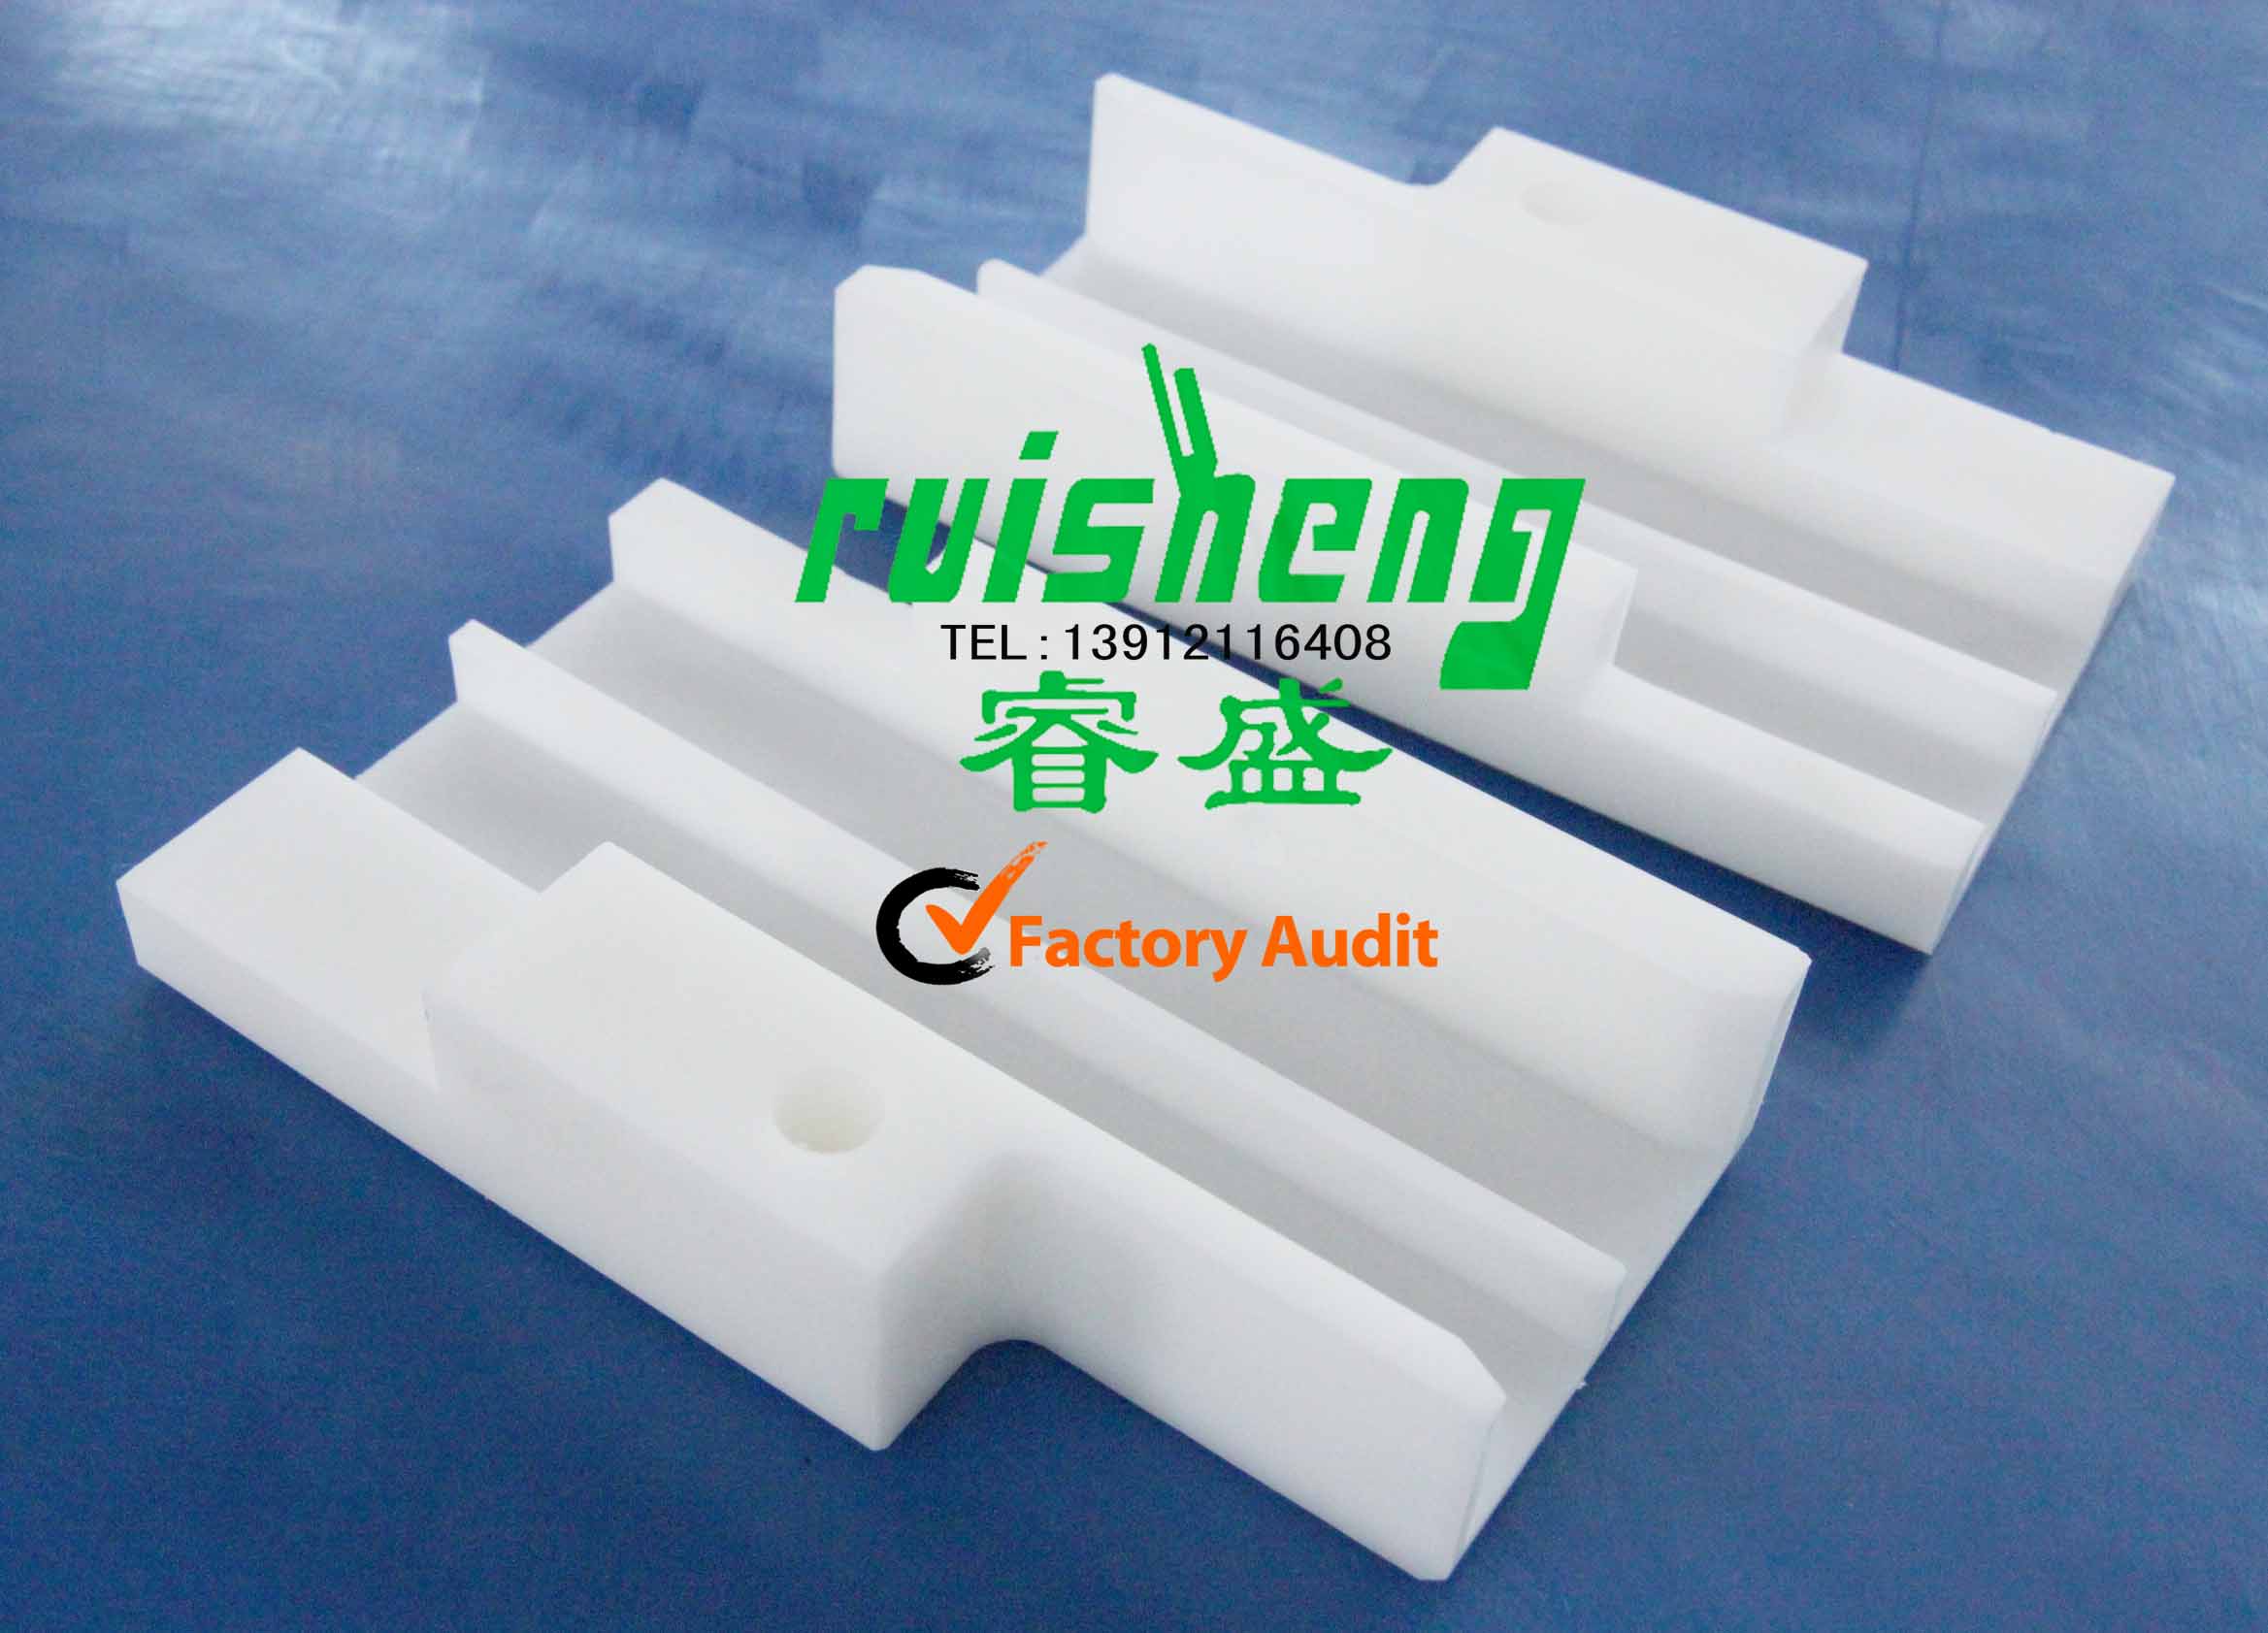 Zhenjiang Ruishen Electrical Equipment Co.,Ltd is a company specializing in engineering plastics processing company, specializing in development and production of engineering plastics, which bridges the slider with PTFE, polyethylene sheet has